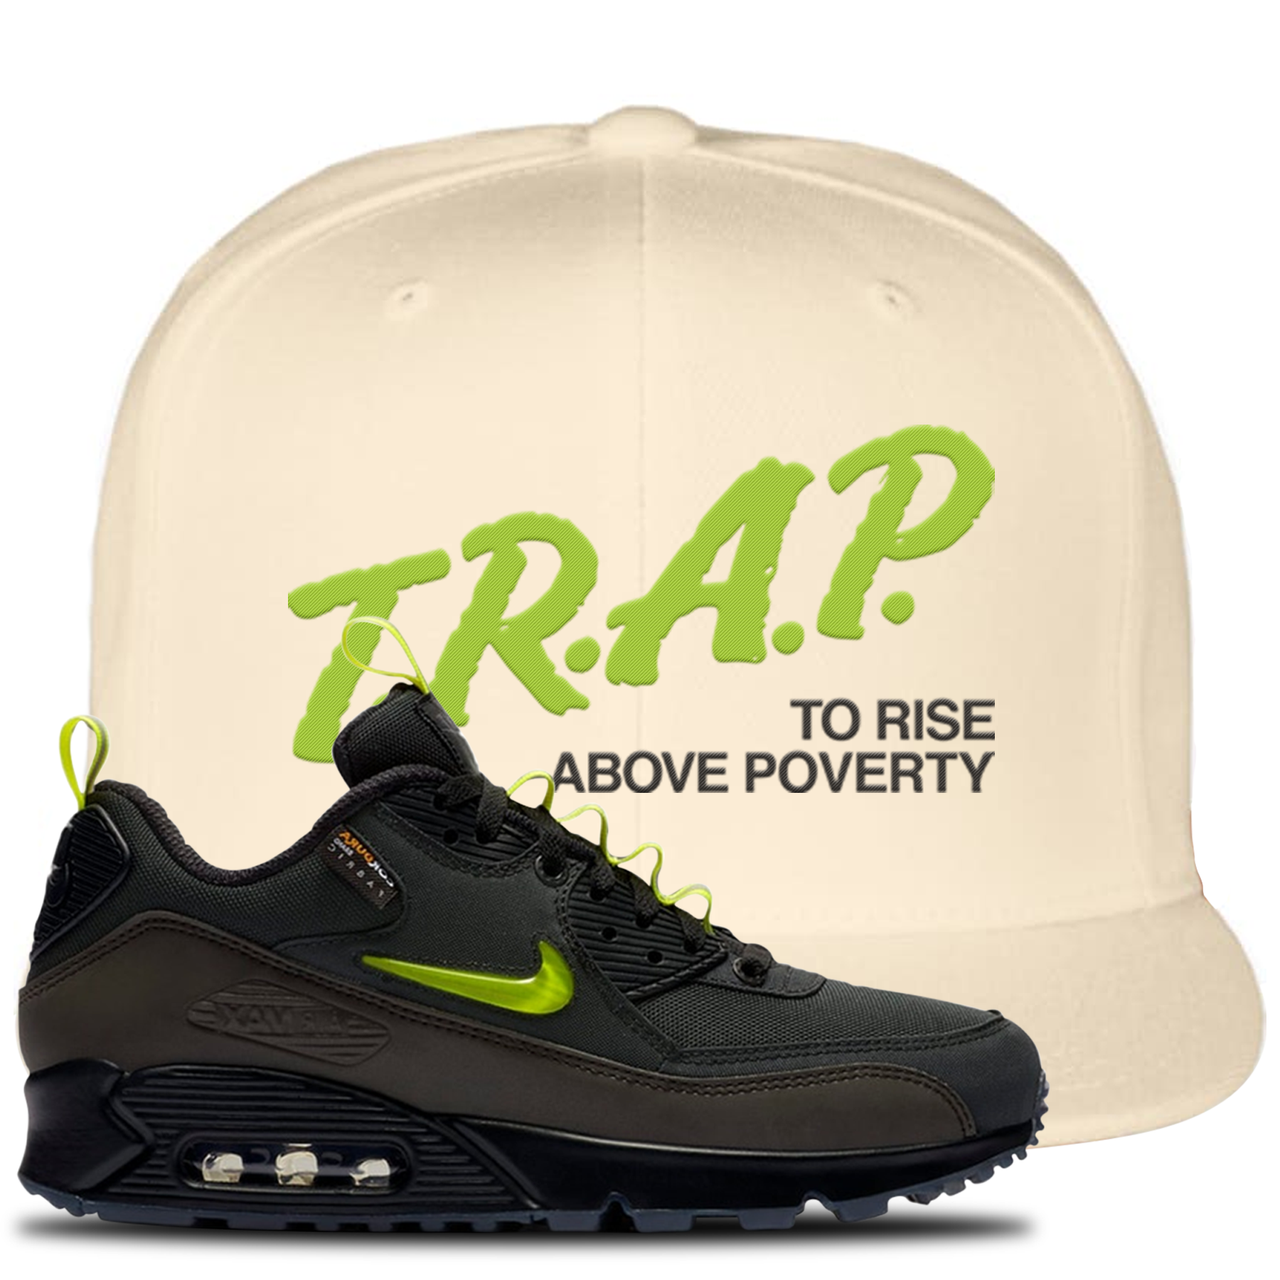 The Basement X Air Max 90 Manchester Trap to Rise Above Poverty White Sneaker Hook Up Snapback Hat